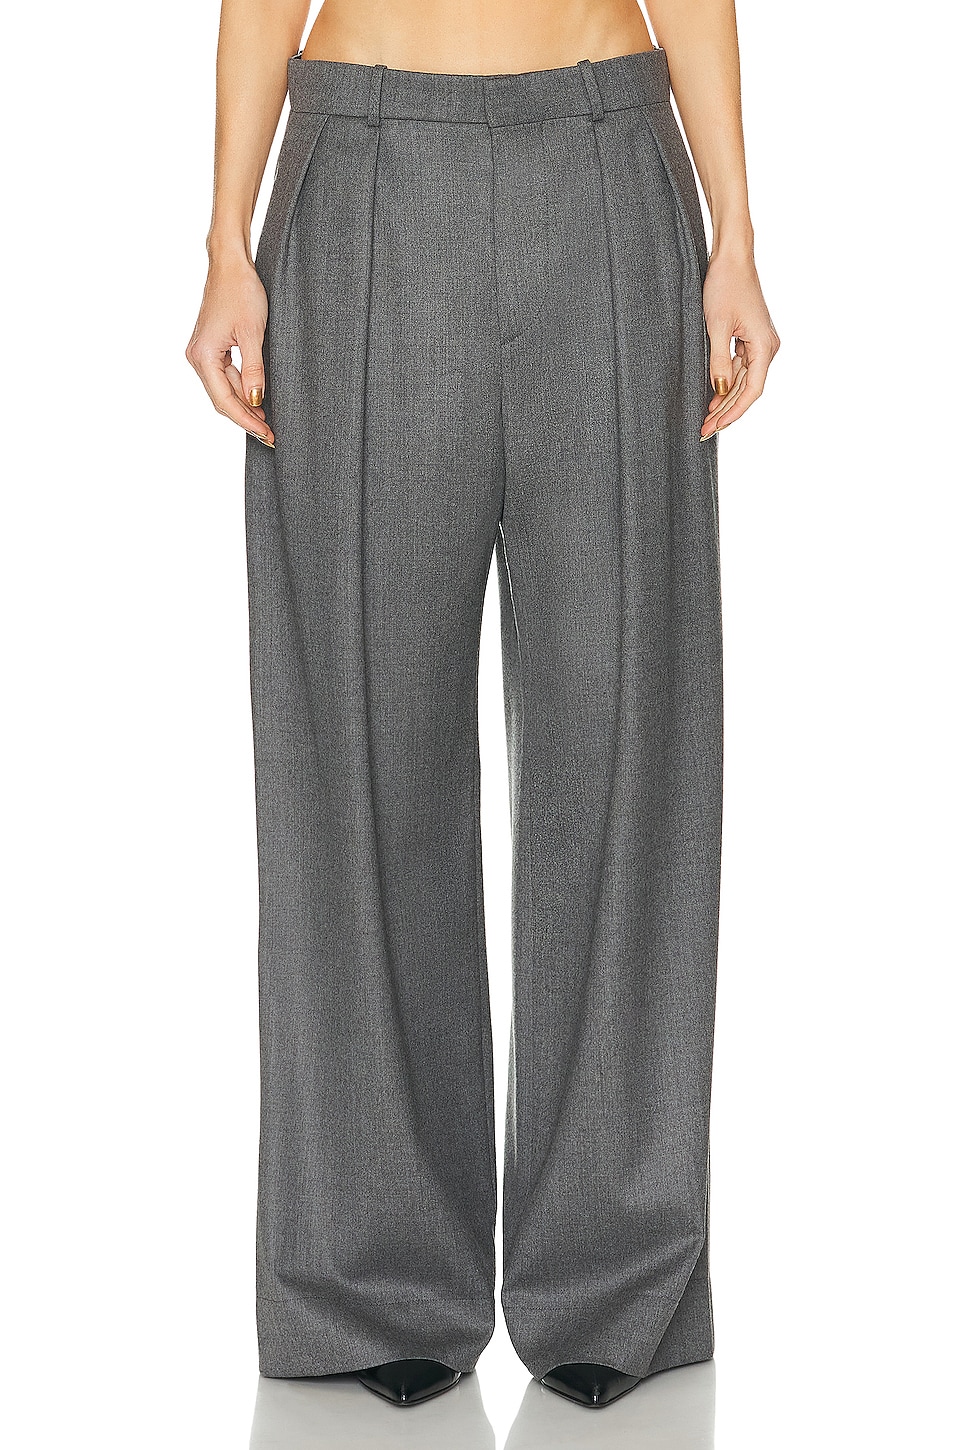 Low Rise Trouser in Charcoal